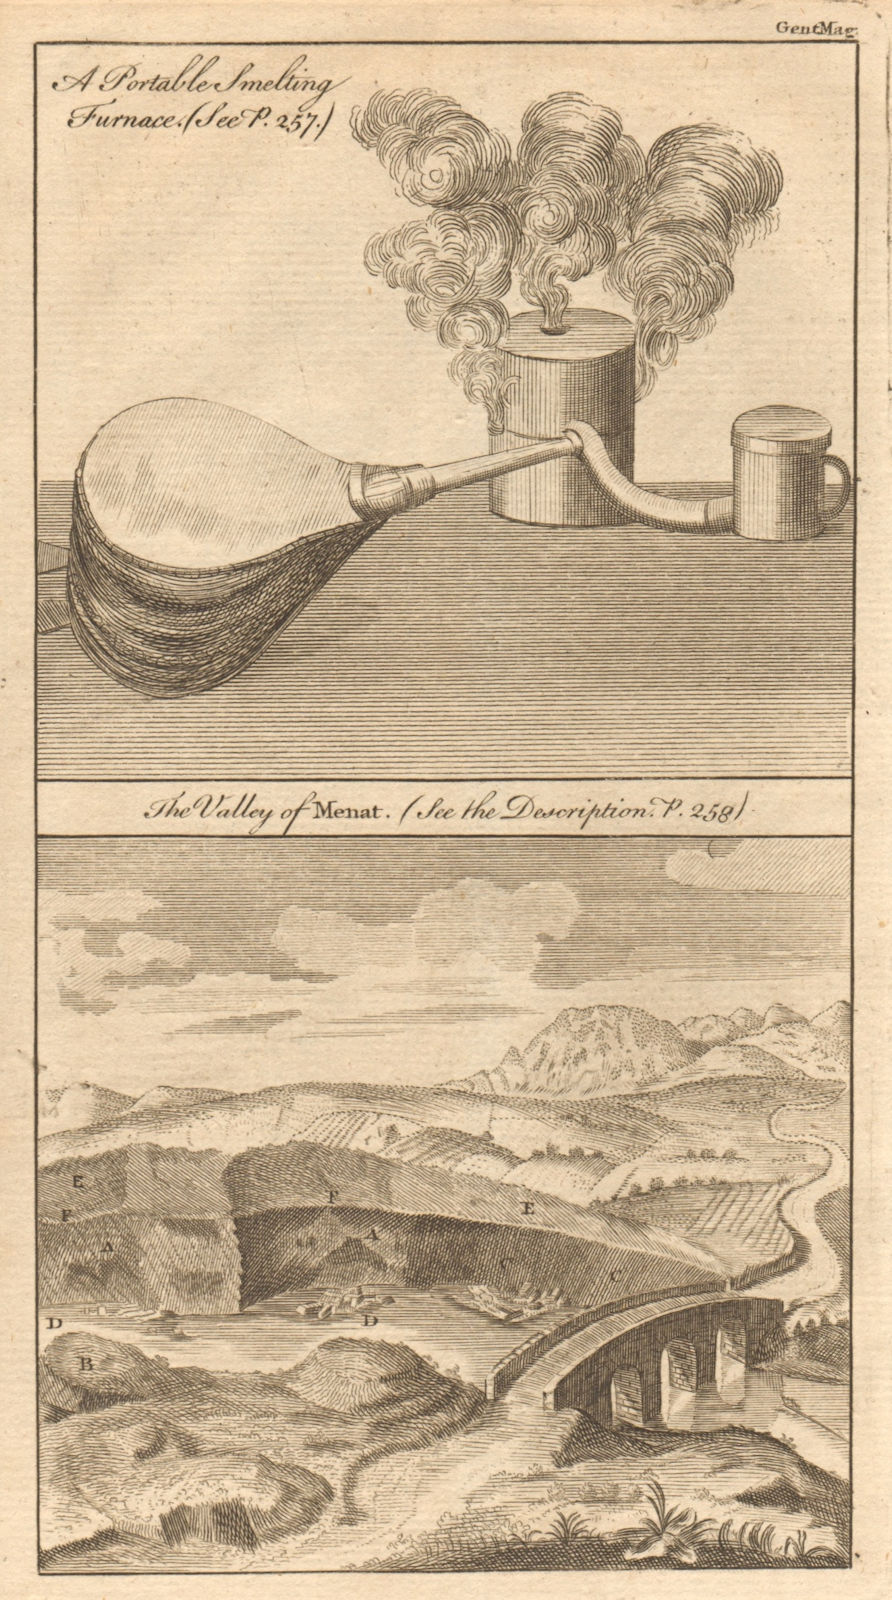 A portable smelting furnace. The valley of Menat, Puy-de-Dôme 1761 old print